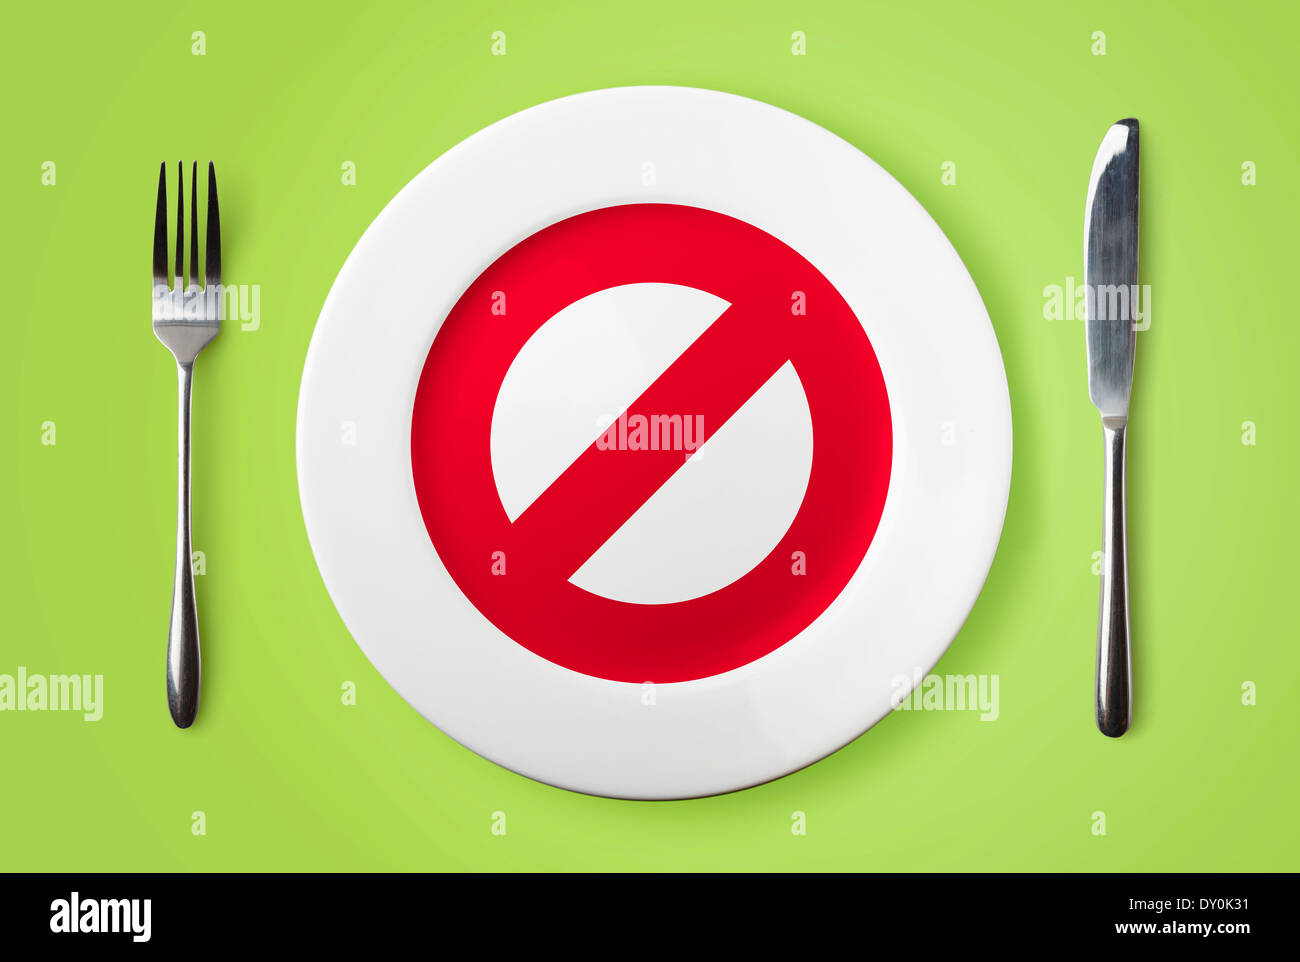 Empty plate with no red sign, fork and knife on green background Stock Photo